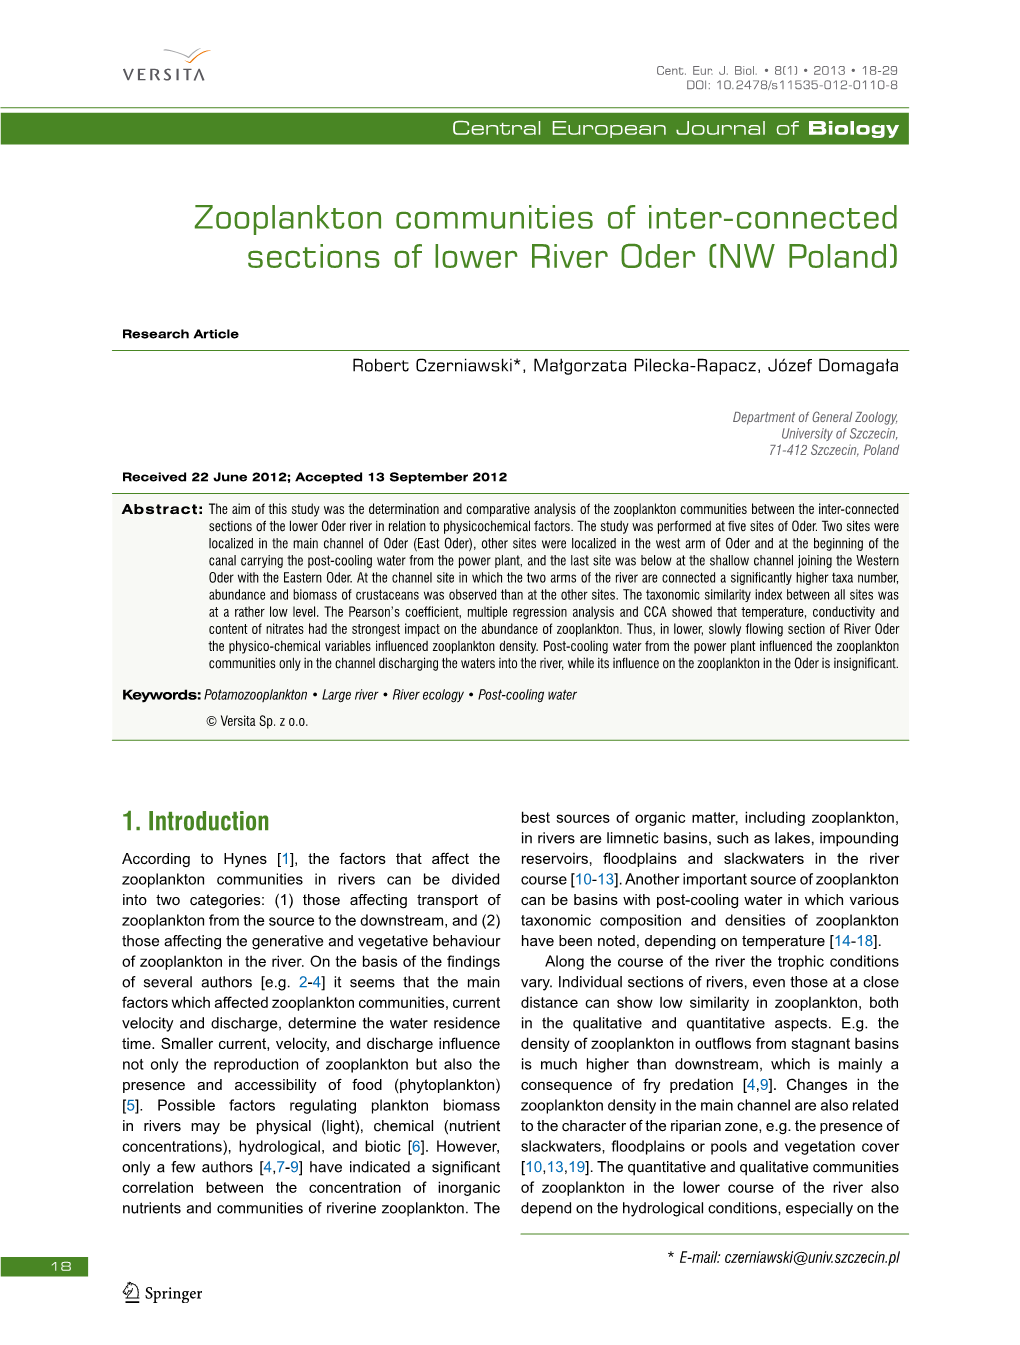 Zooplankton Communities of Inter-Connected Sections of Lower River Oder (NW Poland)